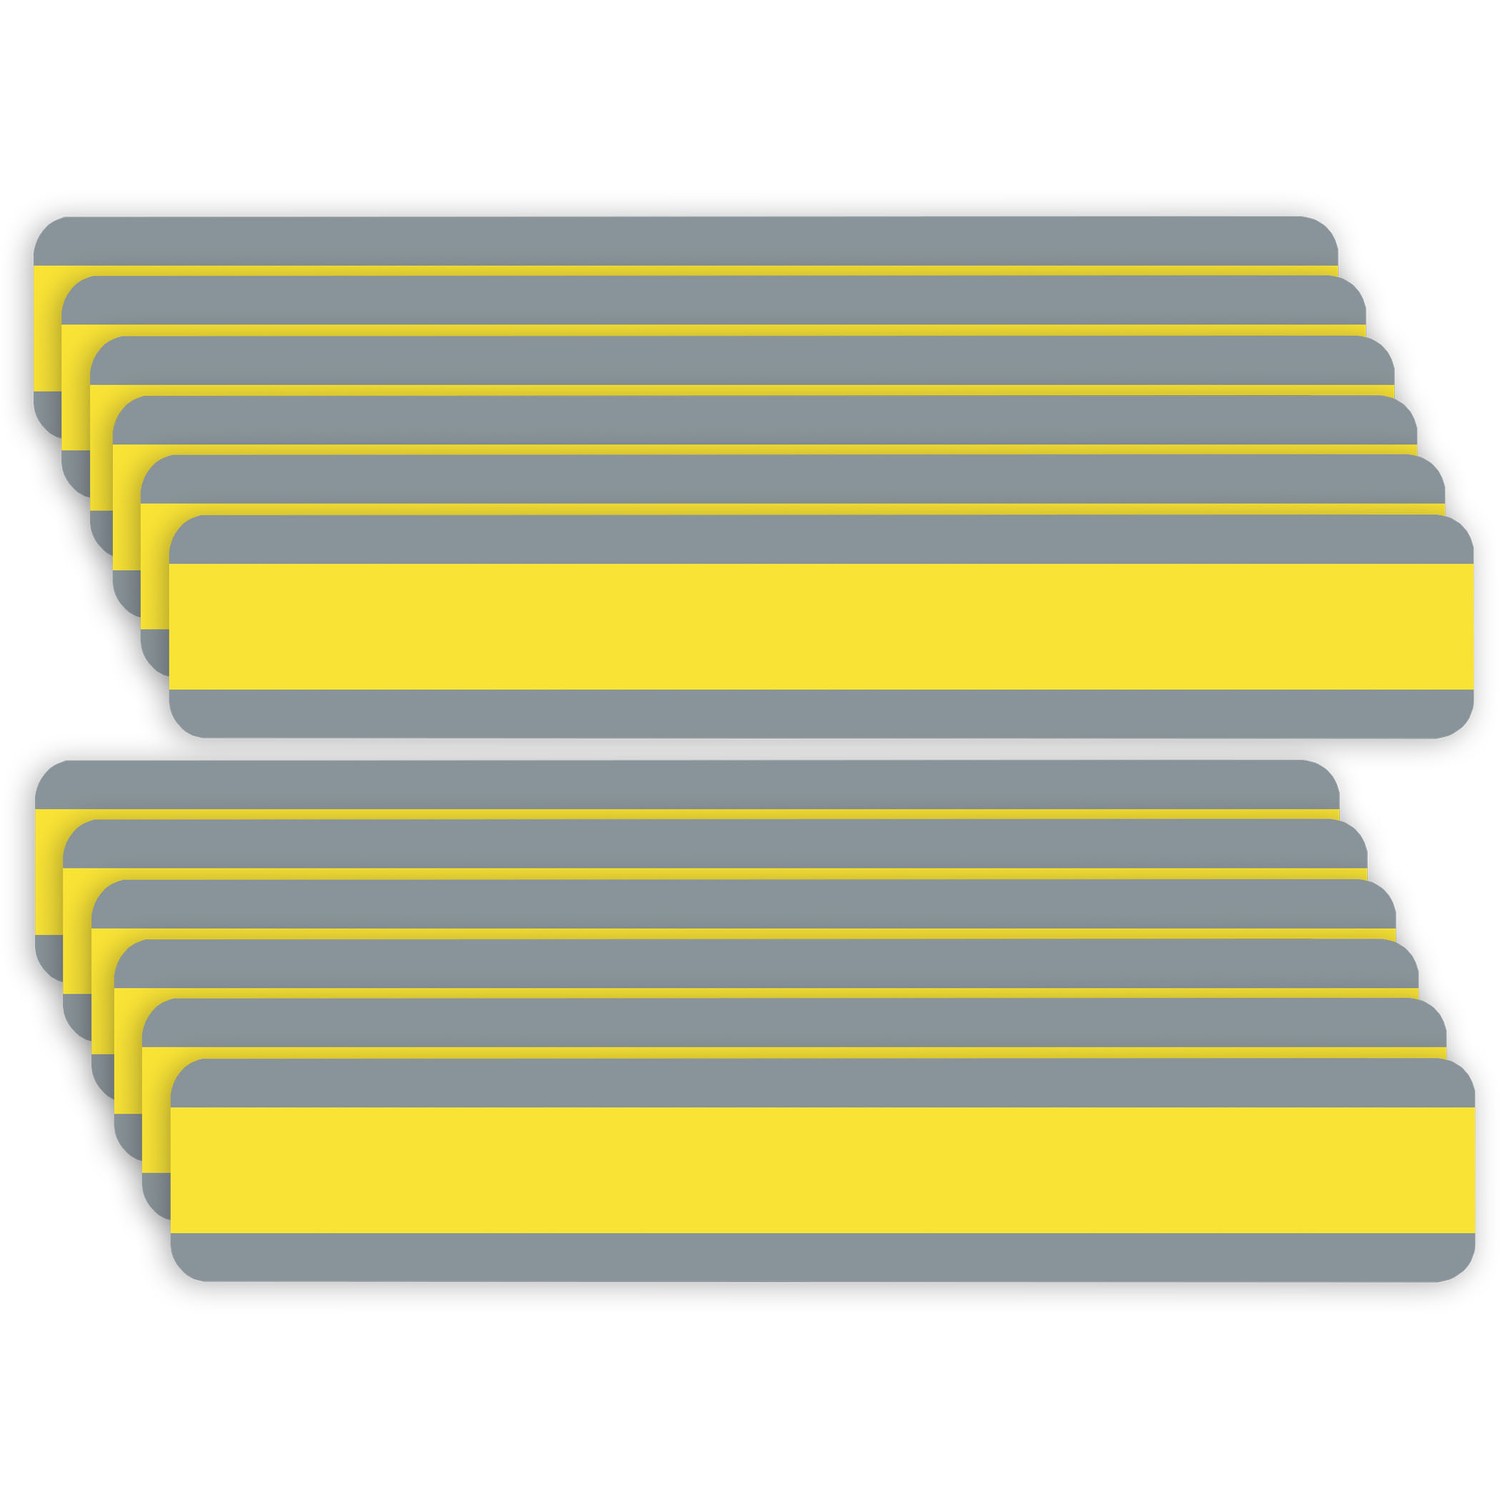 Double Wide Sentence Strip Reading Guide, 1-1/4" x 7-1/4", Yellow, Pack of 12